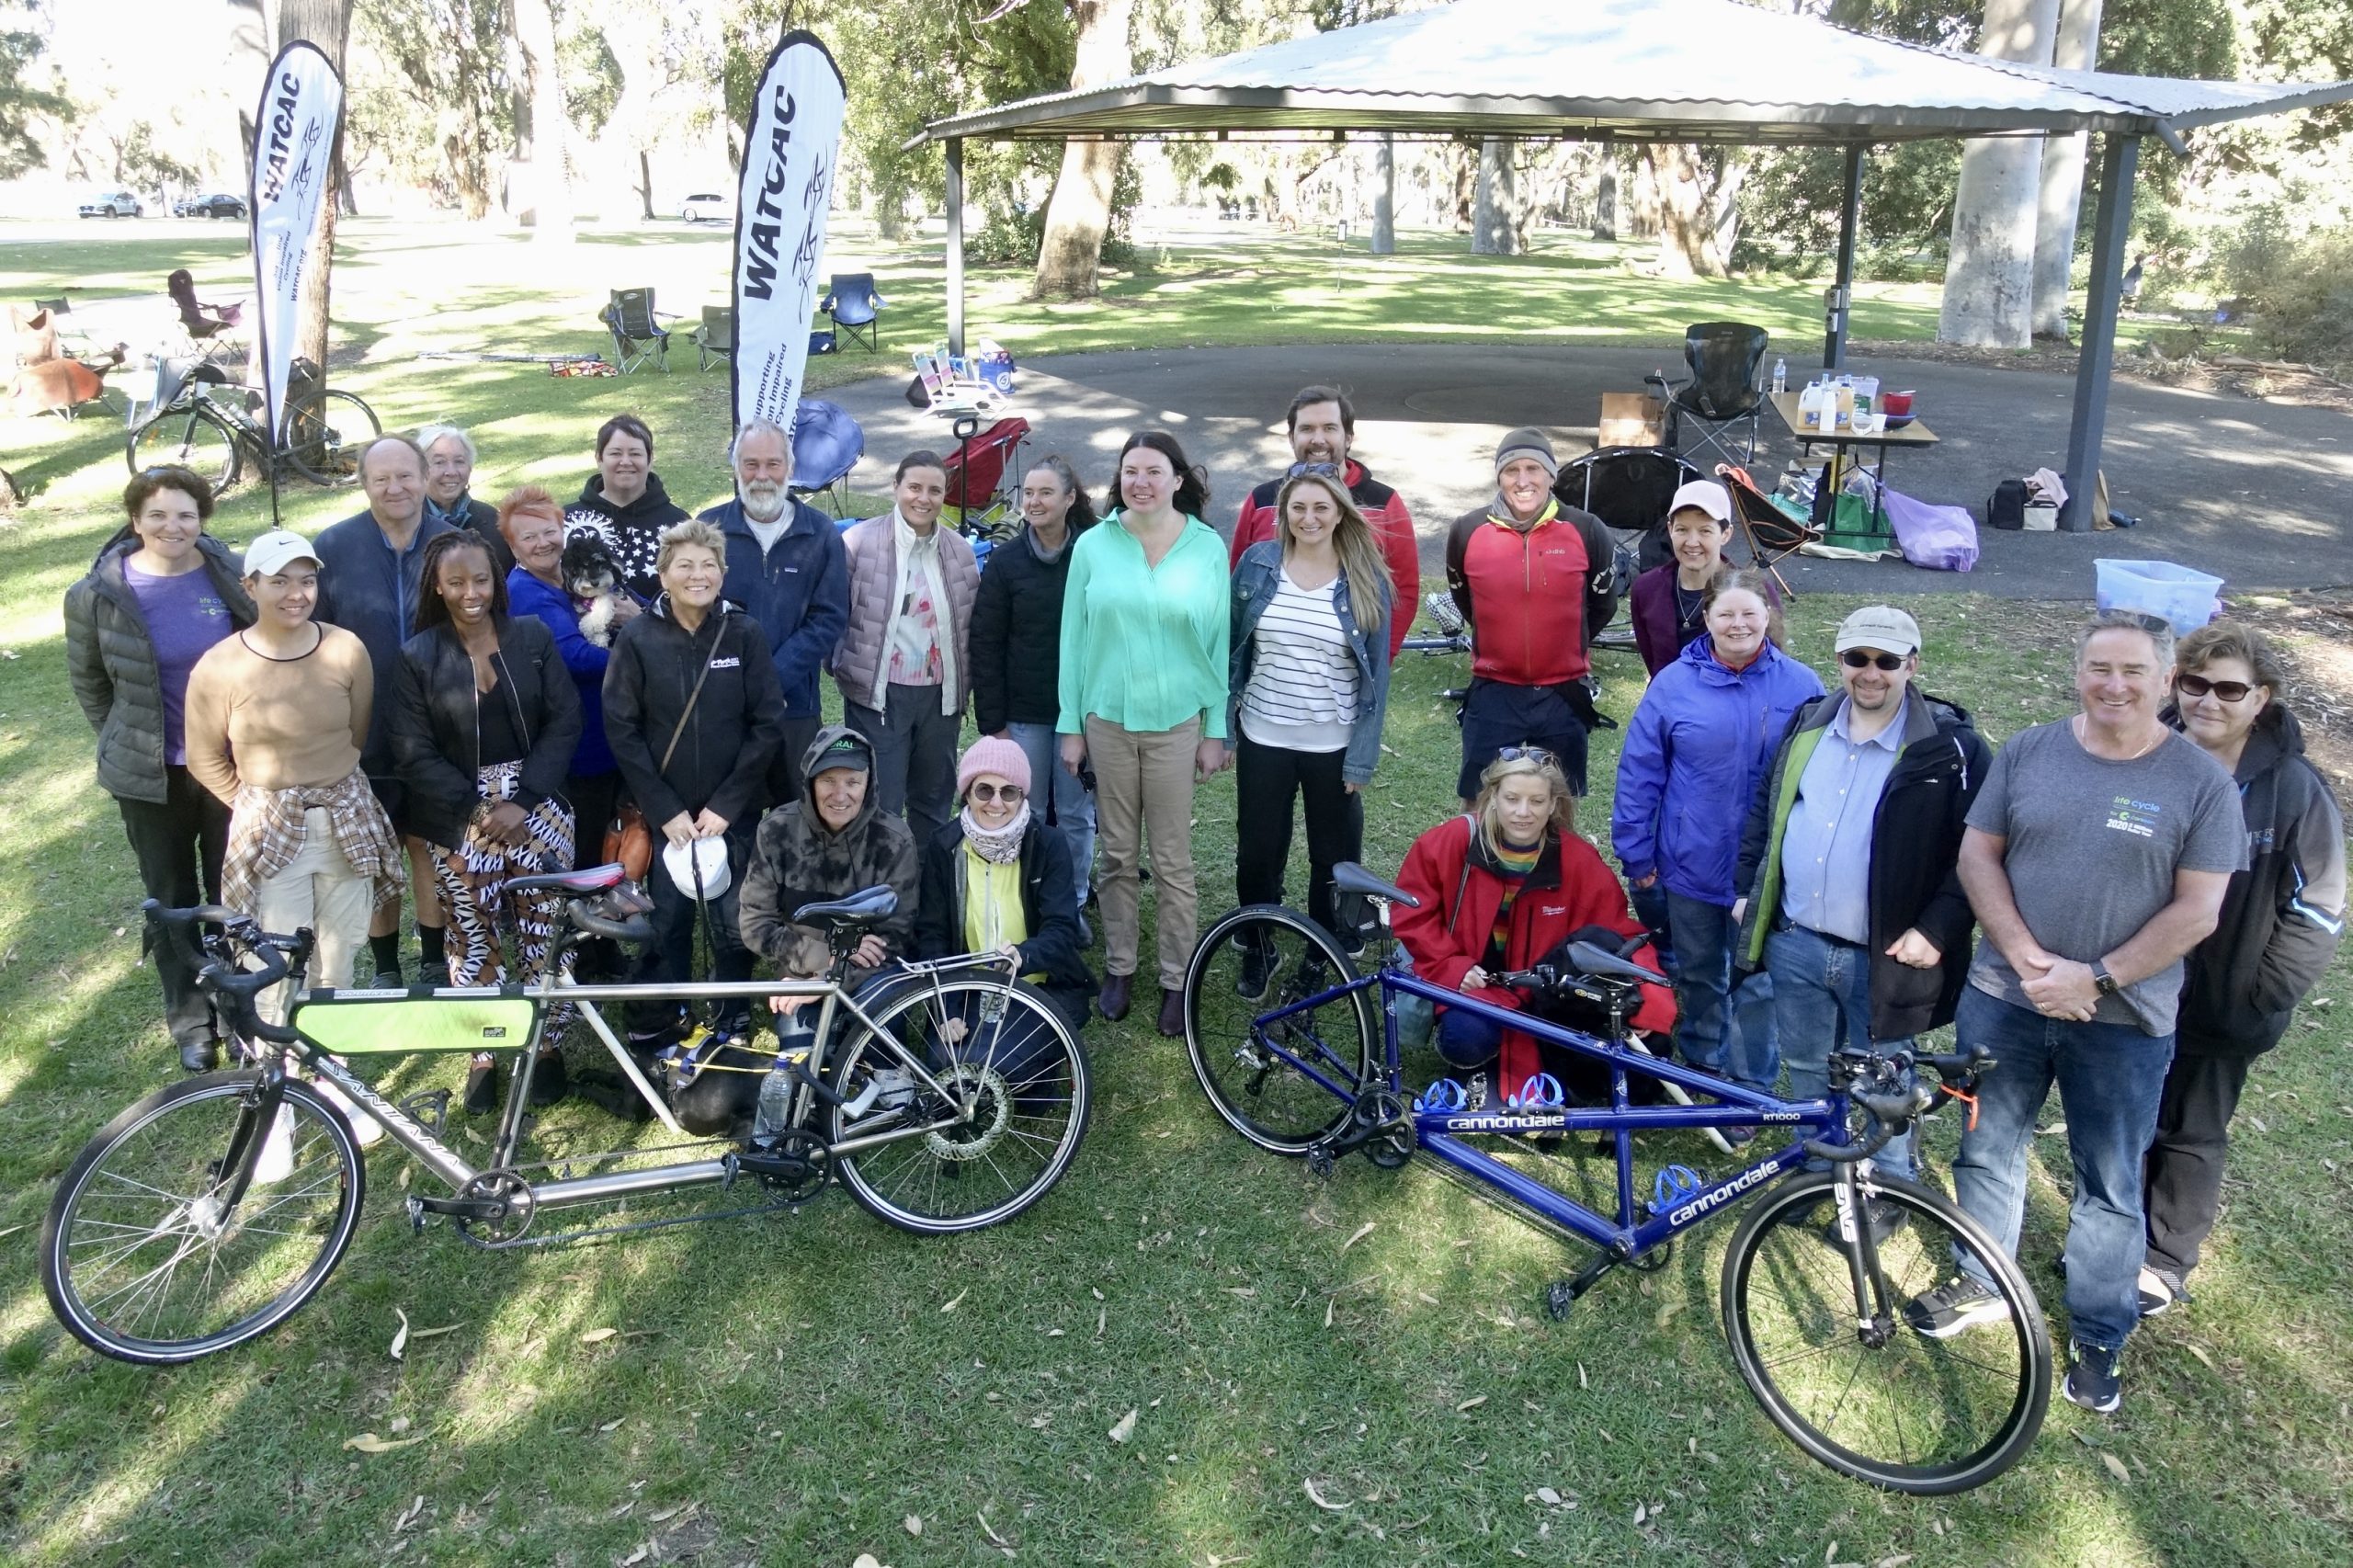 Members and friends gathered for the WATCAC Volunteer Picnic in the scenic backdrop of Kings Park to celebrate the efforts of our members in supporting the Assocation.  The image shows a group of people gathered around two tandem bicycles with WATCAC banners fluttering in the cool winter breeze.